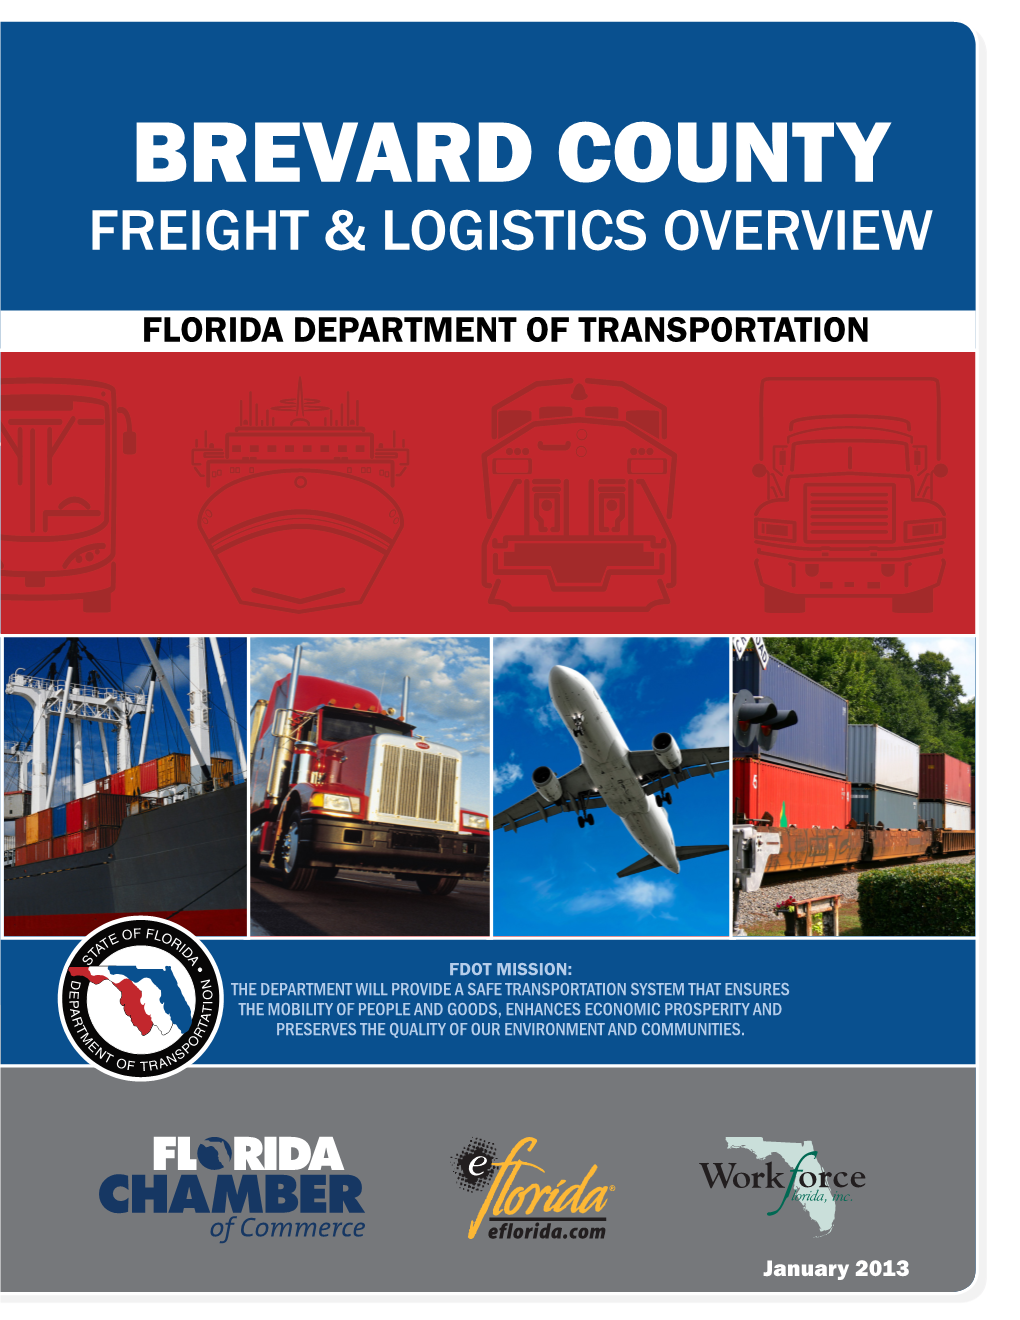 Brevard County Freight & Logistics Overview